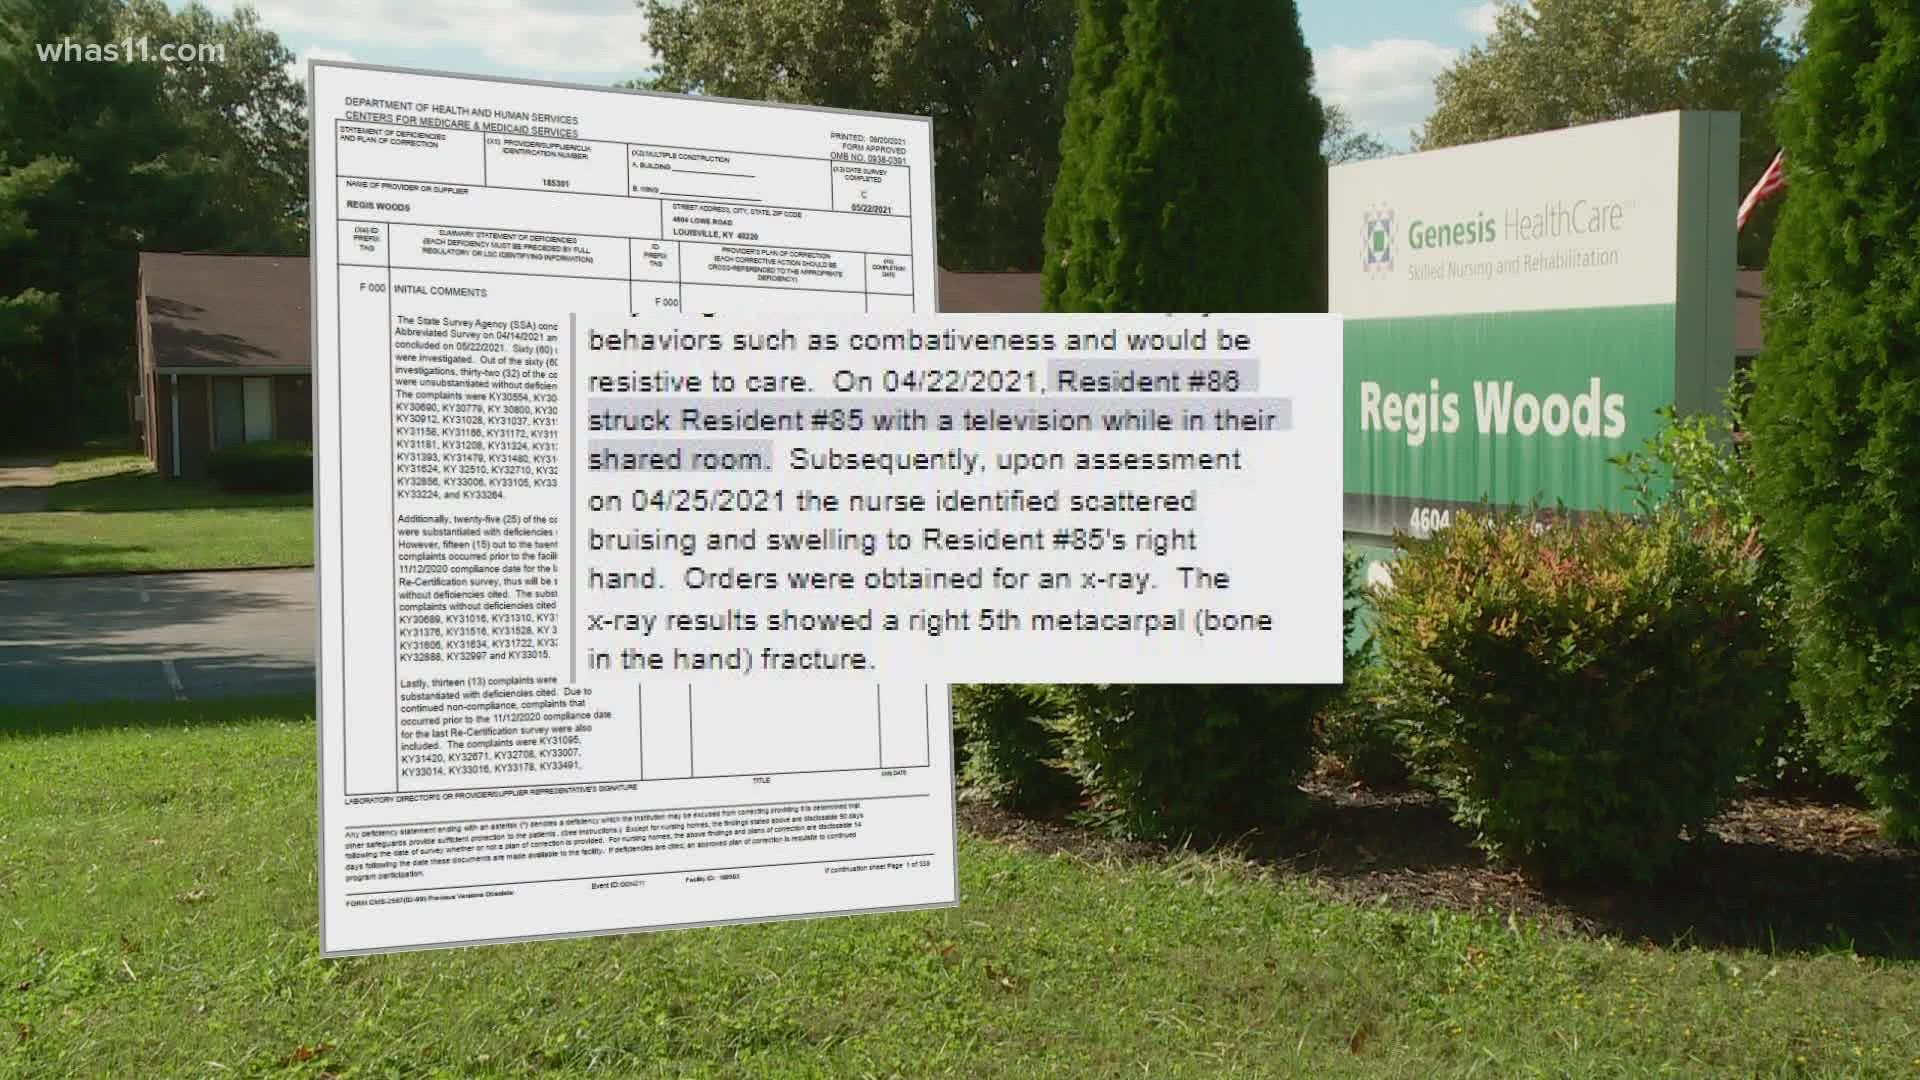 The nursing facility in St. Regis Park is facing several violations including fighting between residents and broken bones. Medicare and Medicaid has pulled funding.